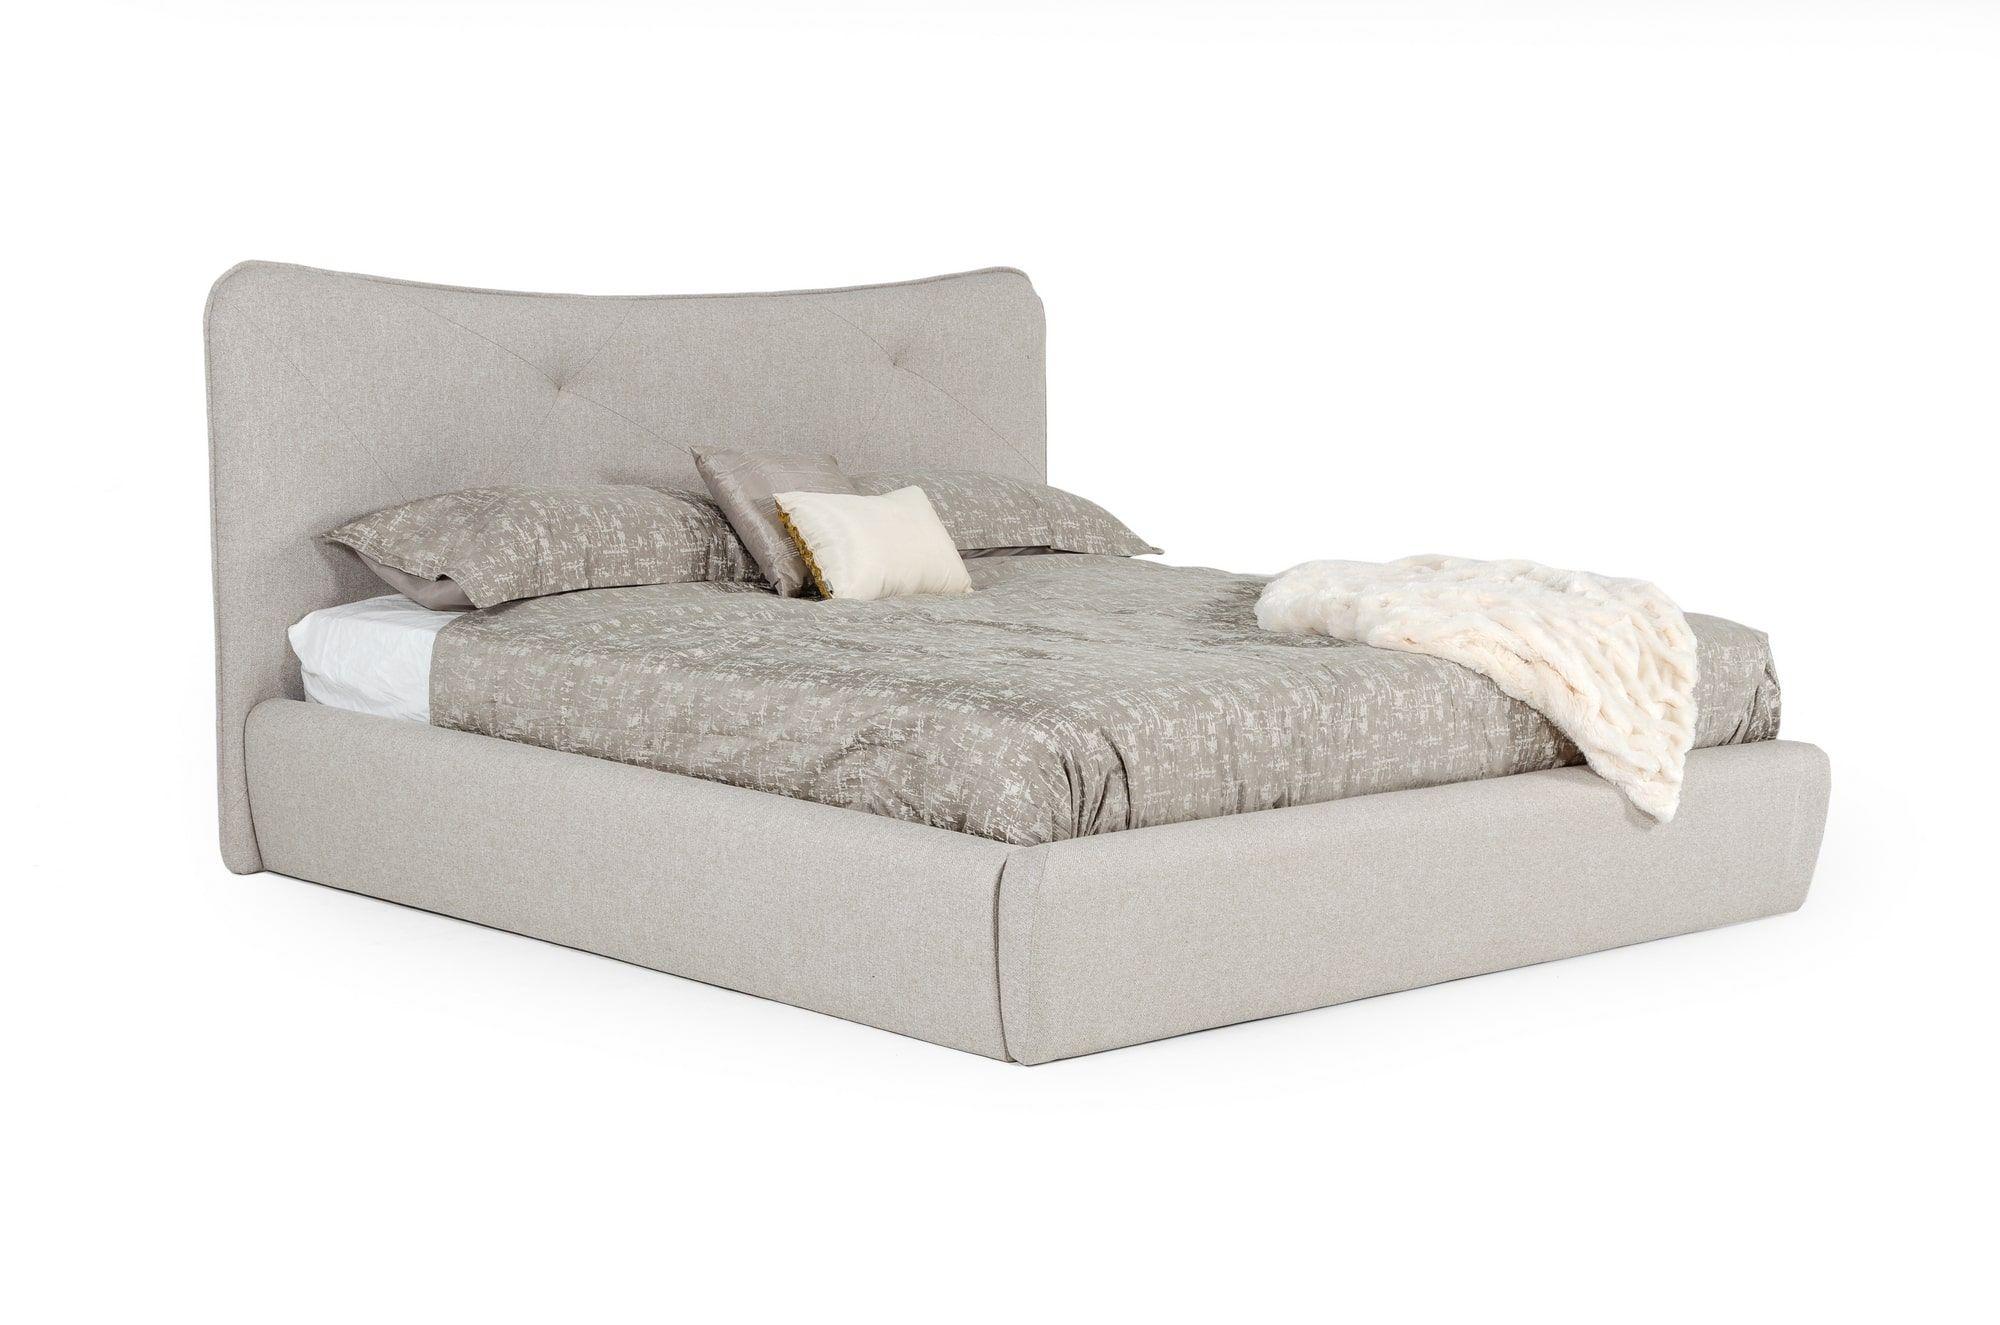 

    
Light Grey Upholstered King Bed Modrest Alessia VIG Modern MADE IN ITALY
